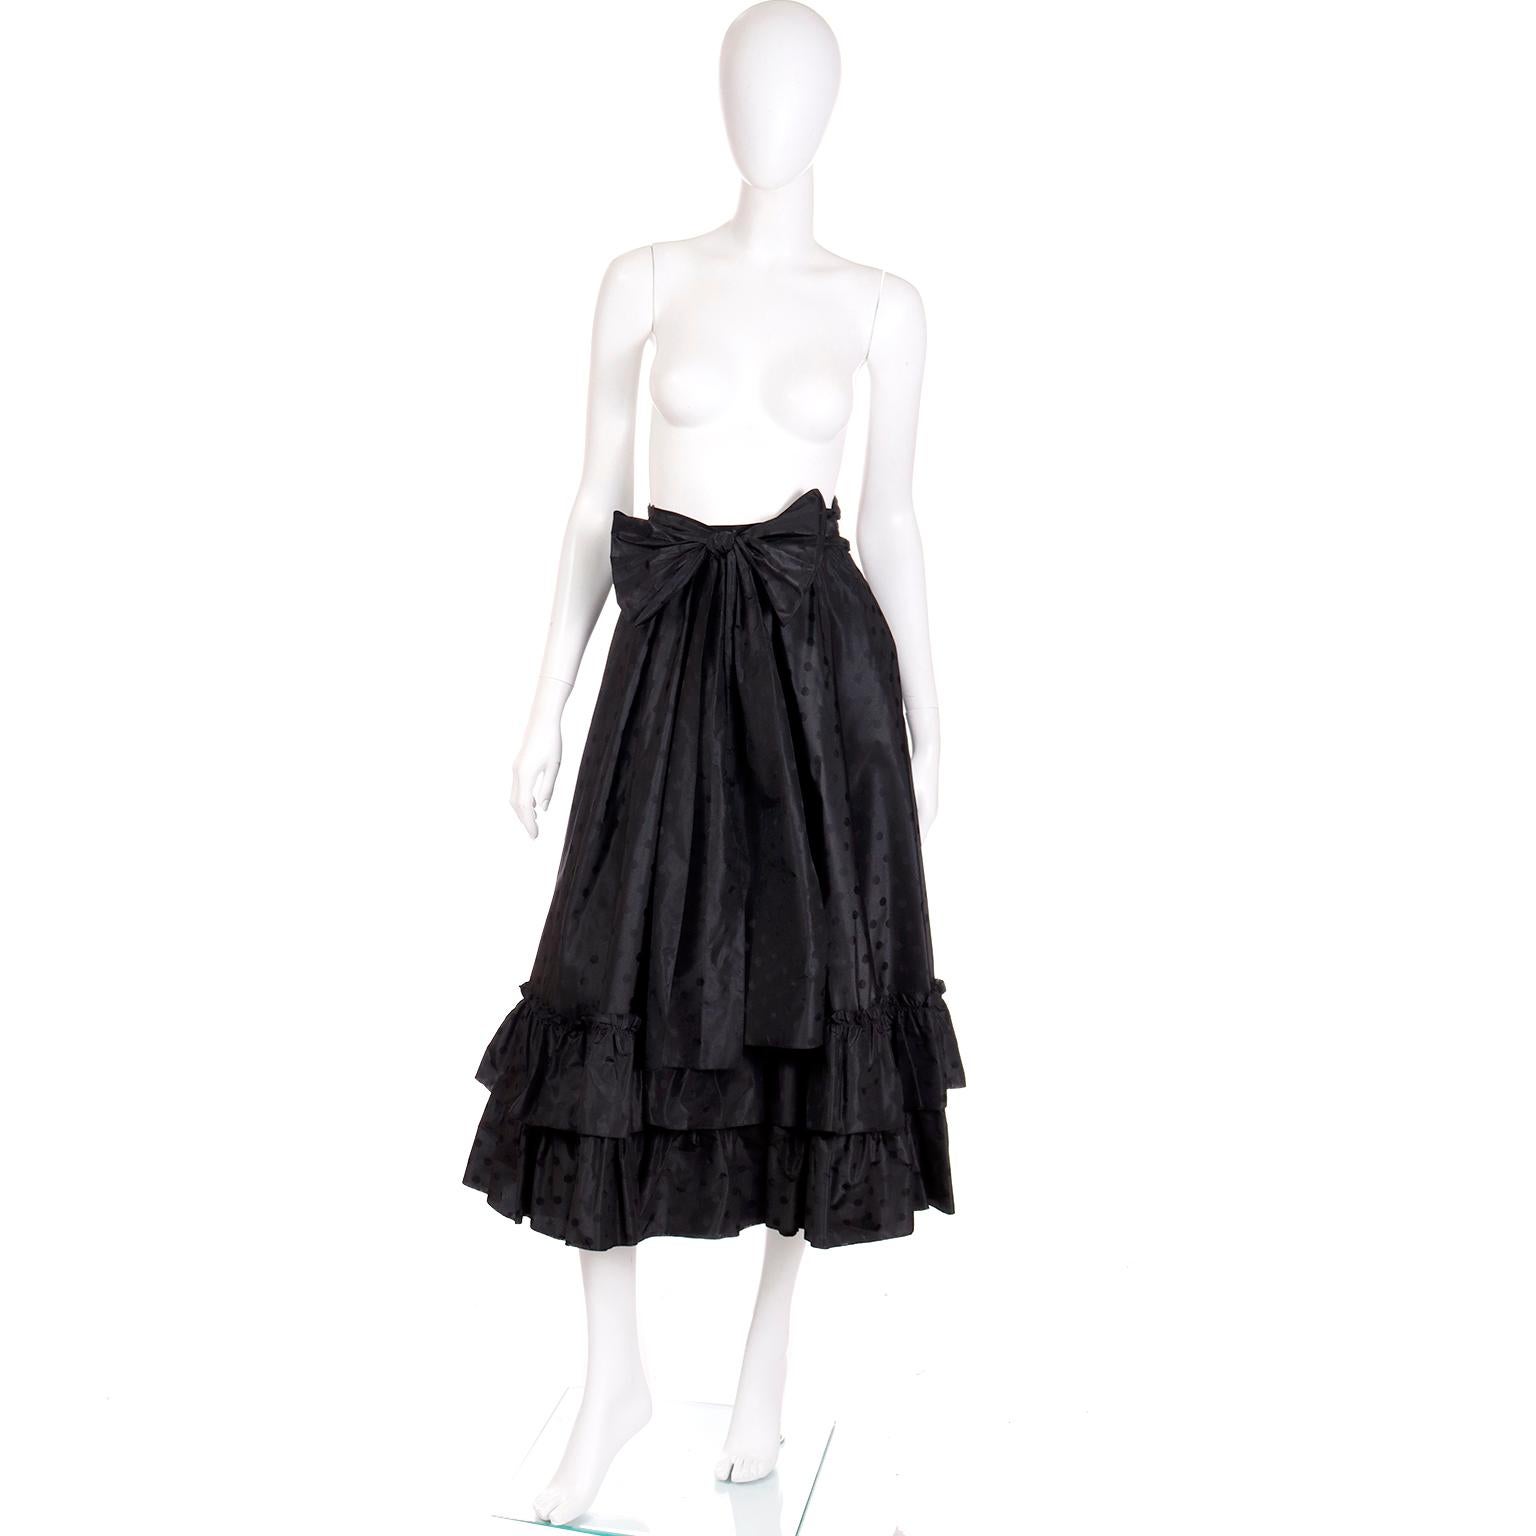 This is a dramatic vintage Louis Feraud black tonal polka dot silk taffeta full skirt with a double tier of ruffles at the bottom. We love the volume in this skirt and it can be worn with so many different kinds of tops! The skirt has a matching